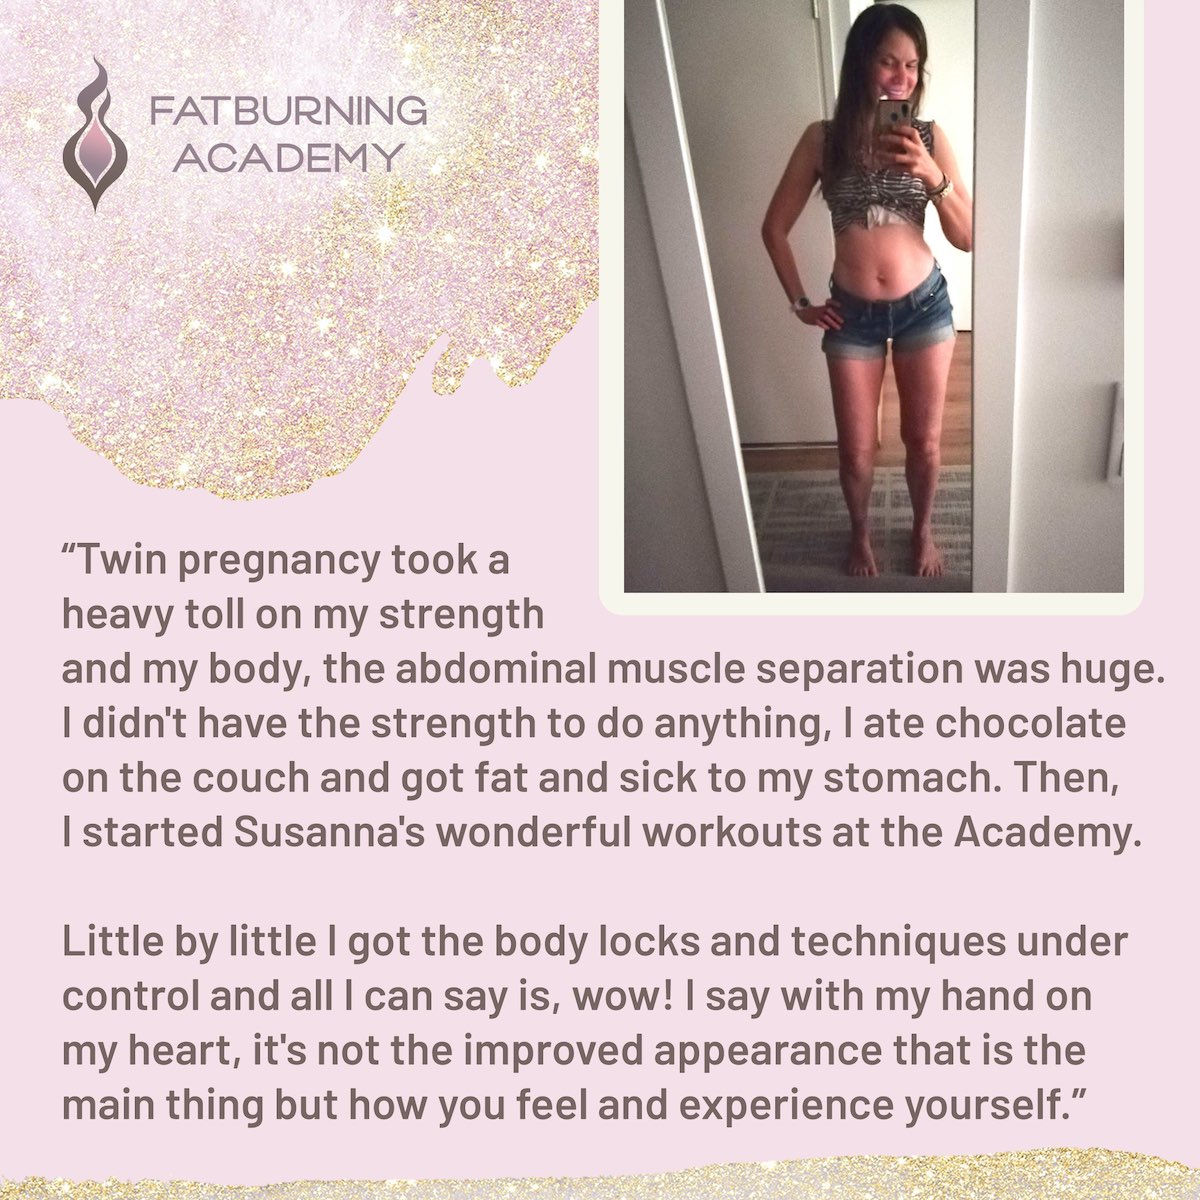 Twin pregnancy weight loss review fatburning app academy 1